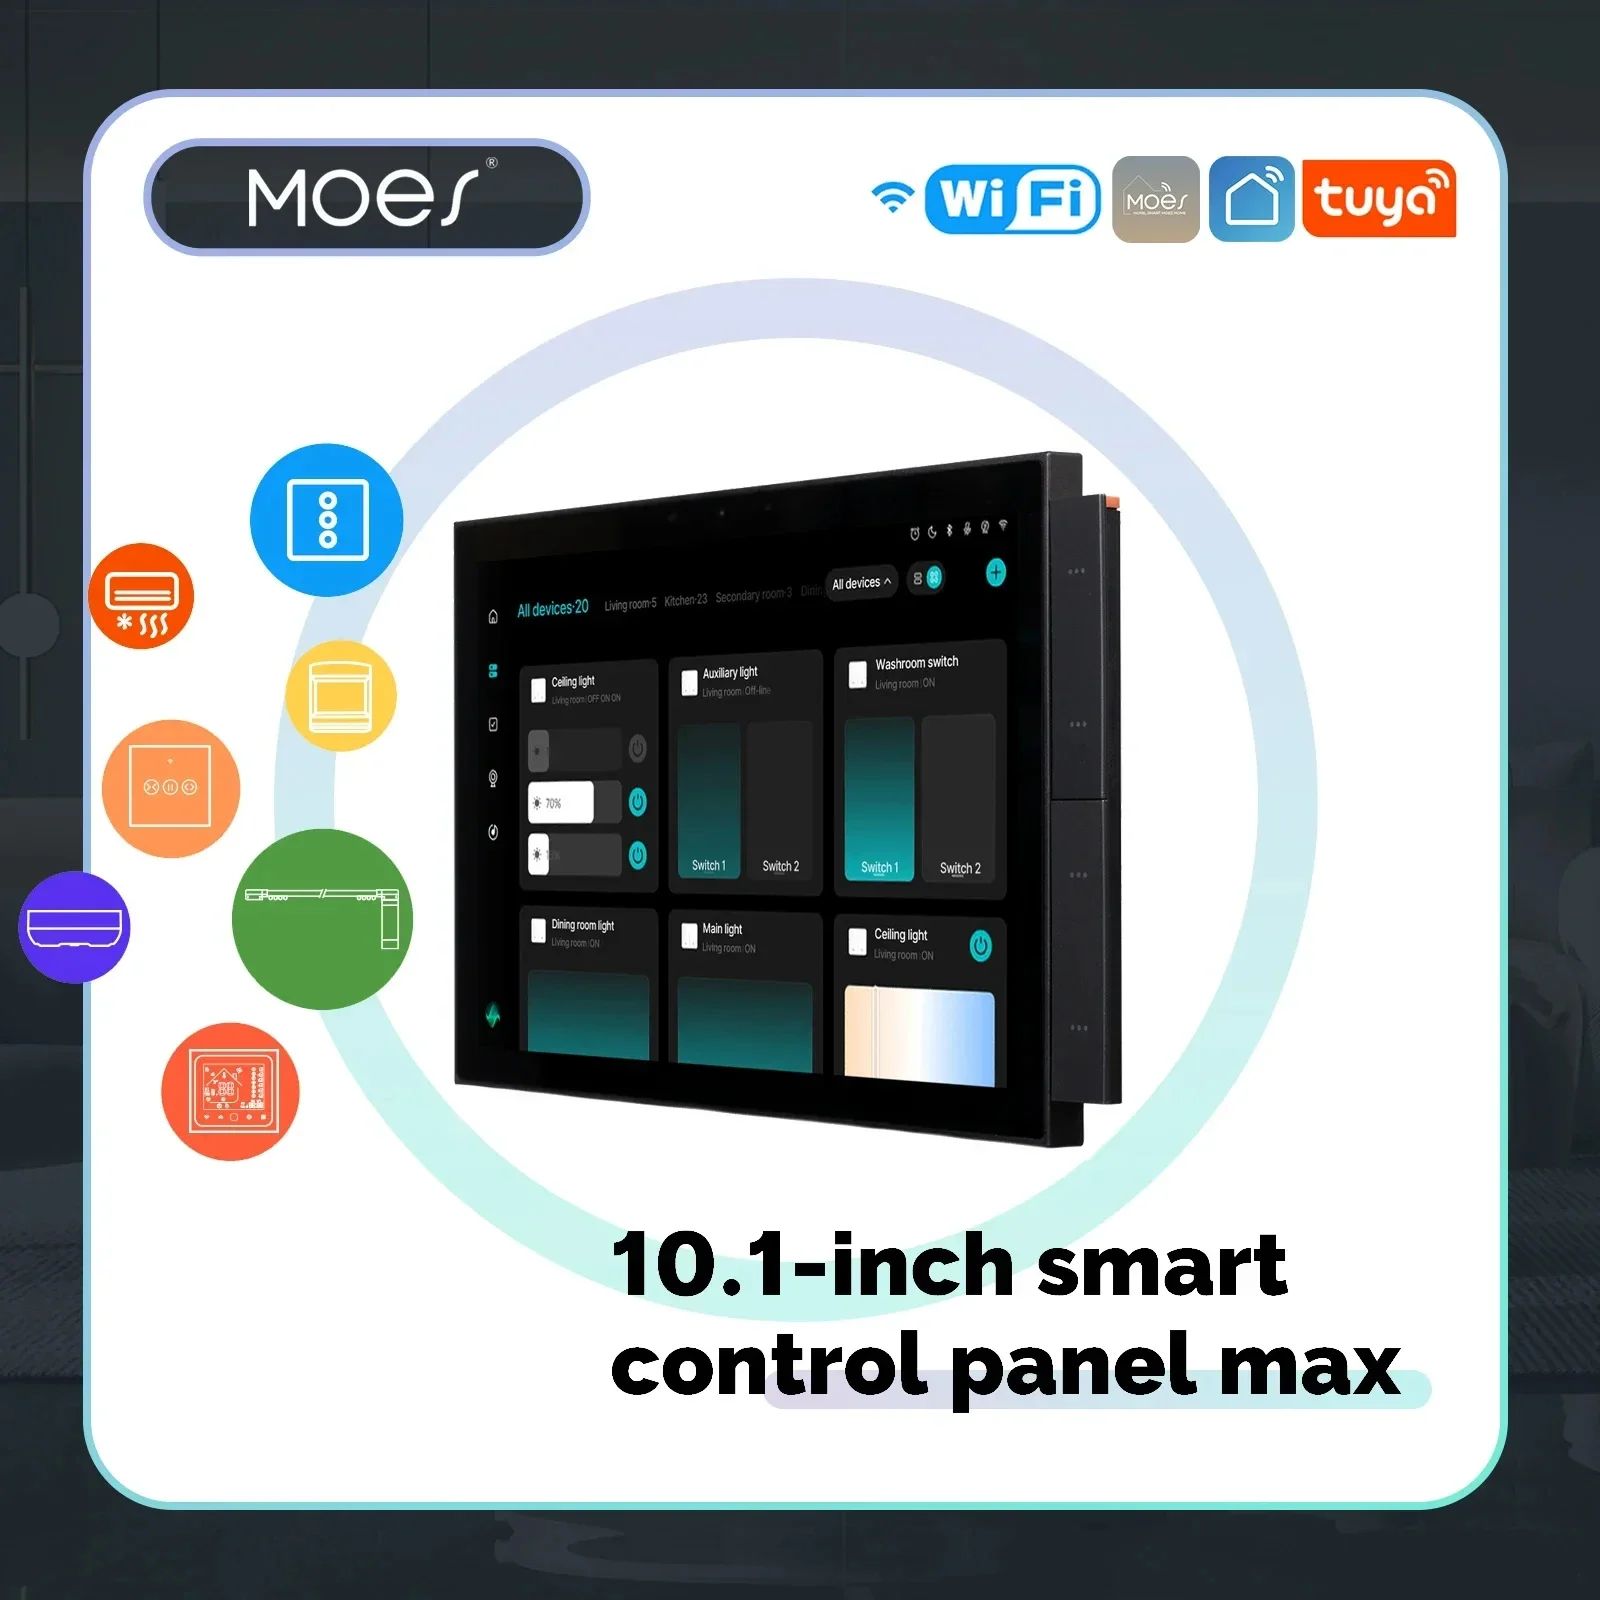 

MOES Tuya Smart Home Control Panel Max 10.1inch Touch Screen with Bluetooth Zigbee Gateway Built-in Building Intercom Compatible